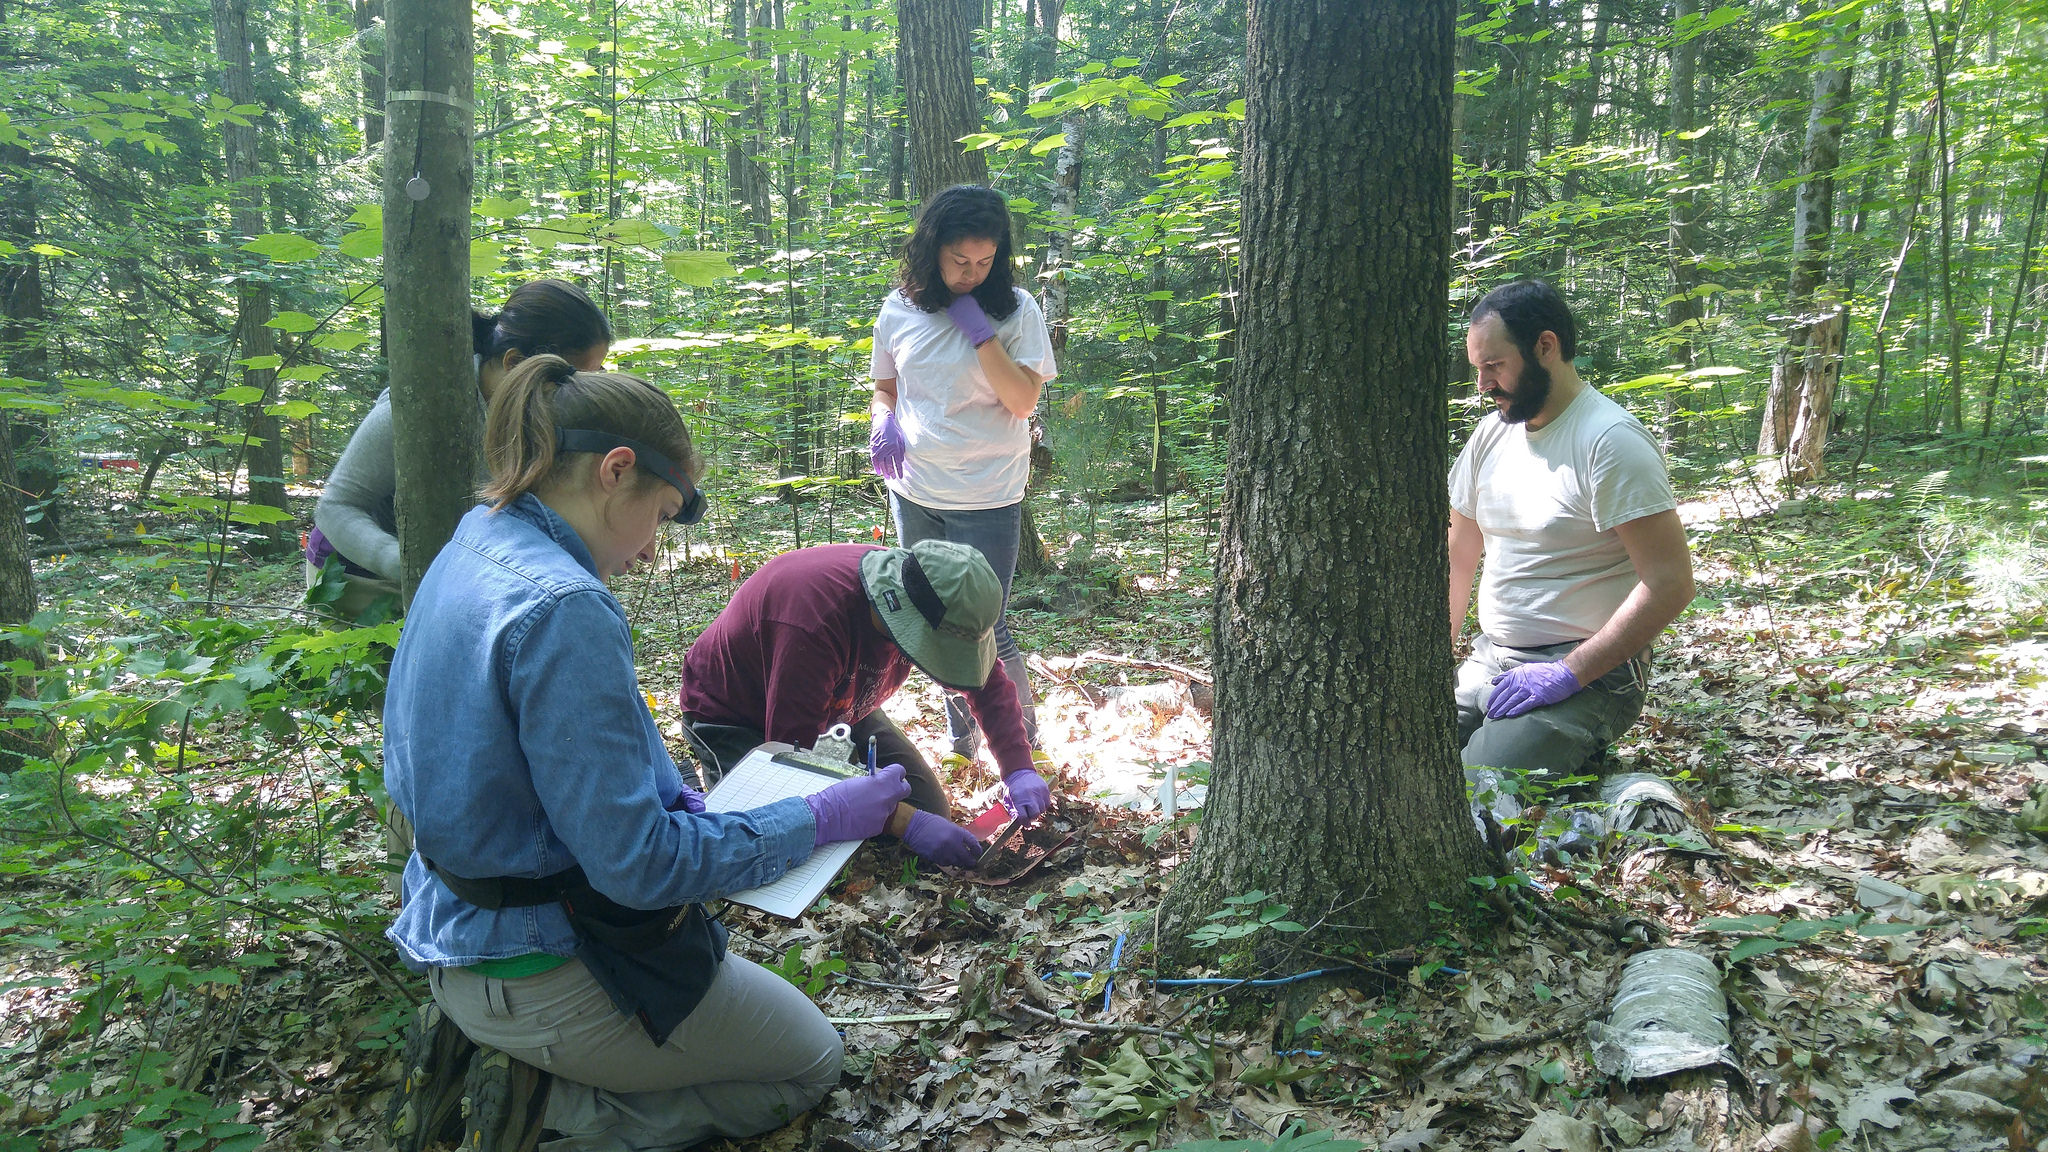 Soil sample collection from the Harvard Forest in Petersham, Massachusetts.